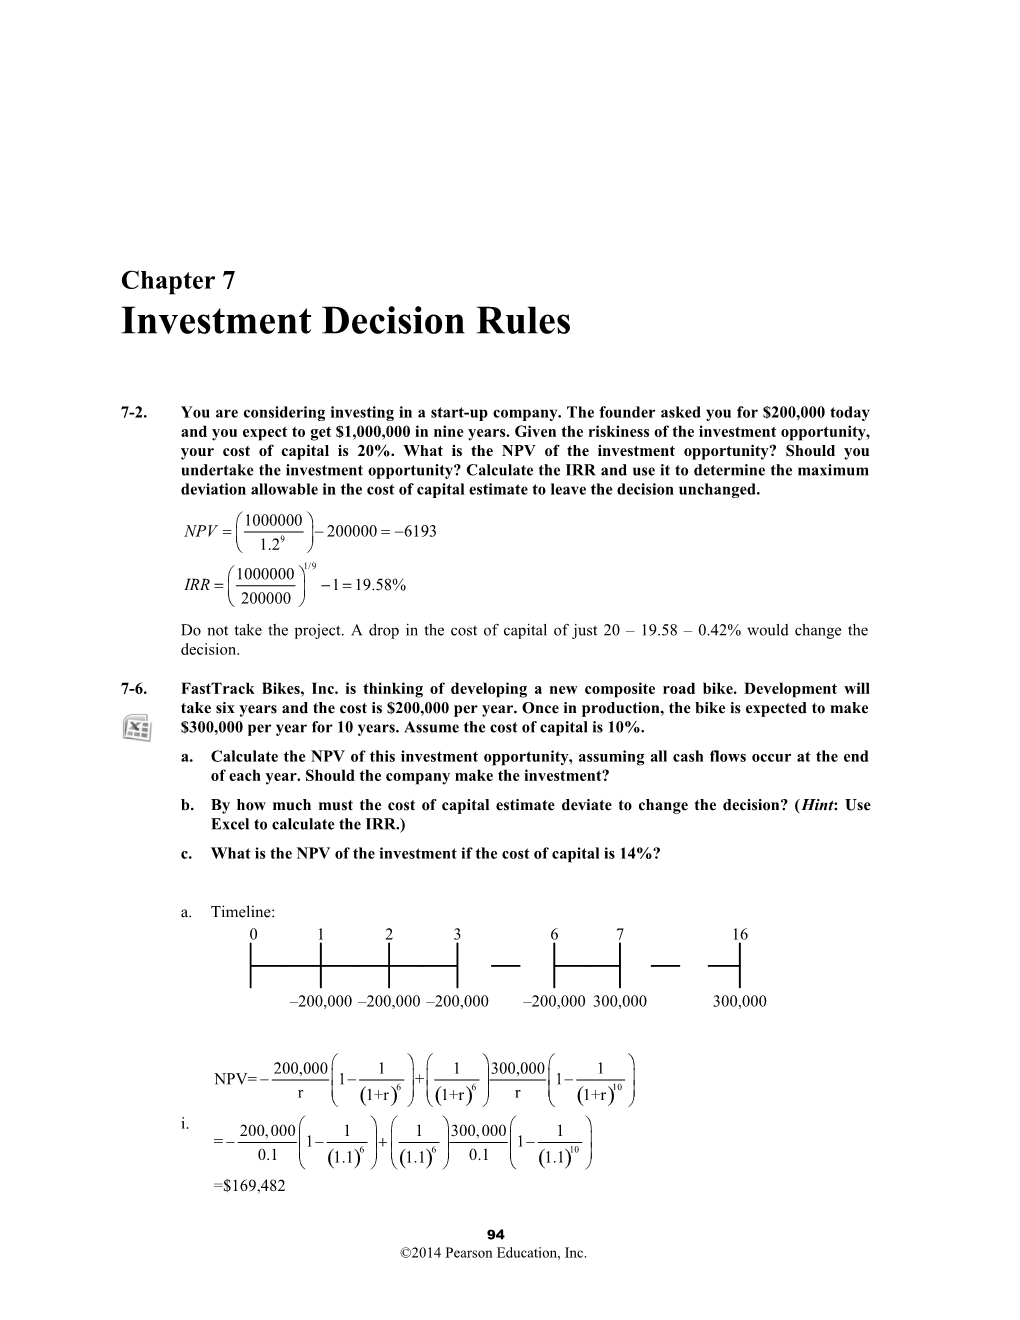 Chapter 7/Investment Decision Rules 1